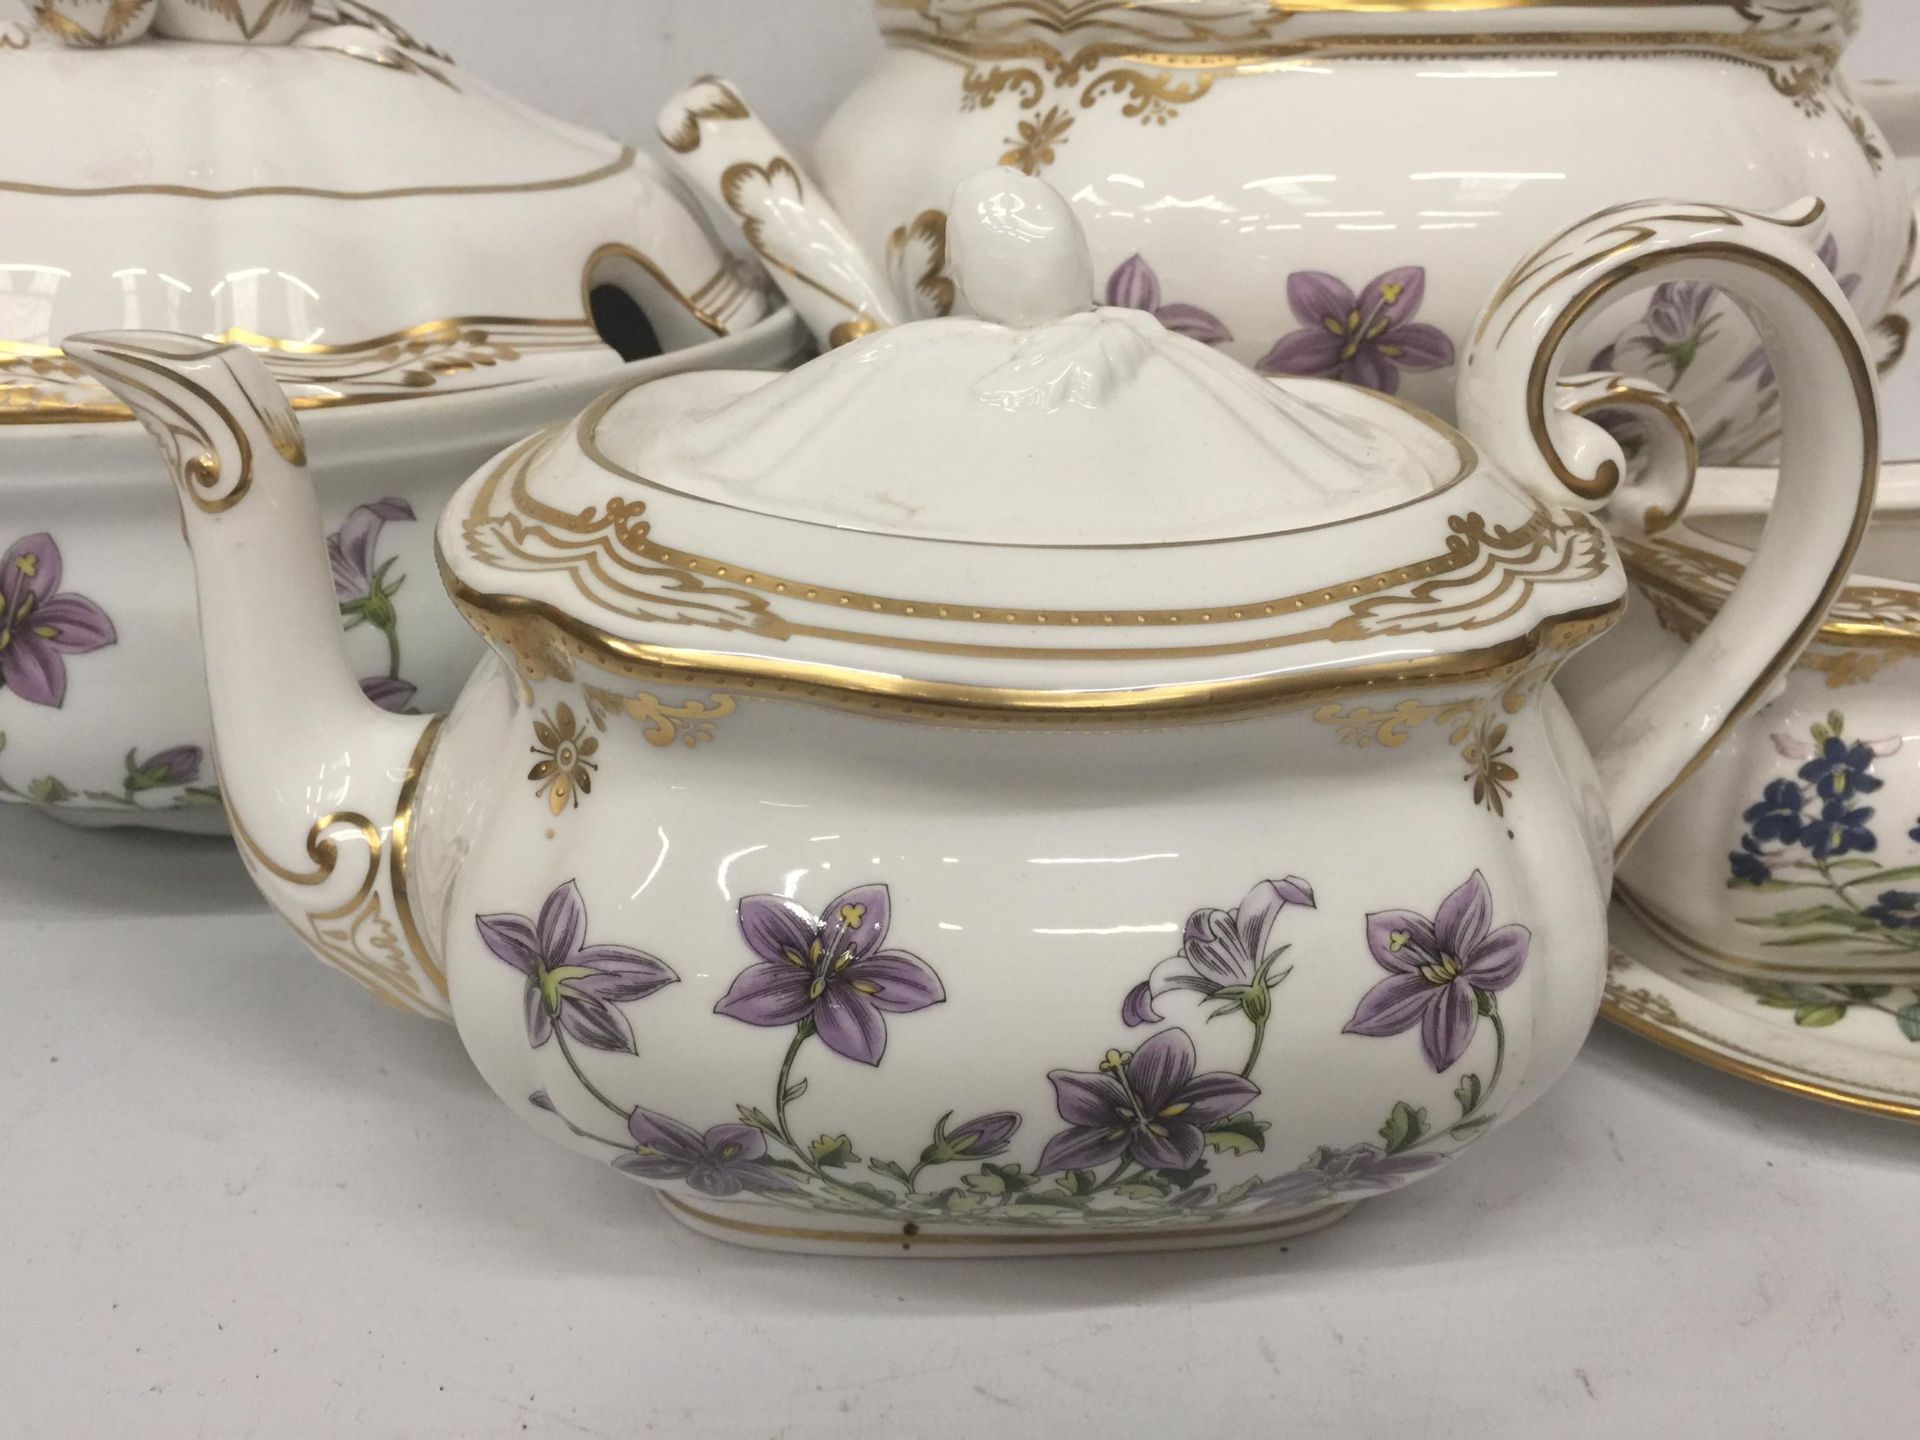 A COLLECTION OF SPODE CANTERBURY AND STAFFORD DLOWERS DINNER SERVICE ITEMS - Image 4 of 8